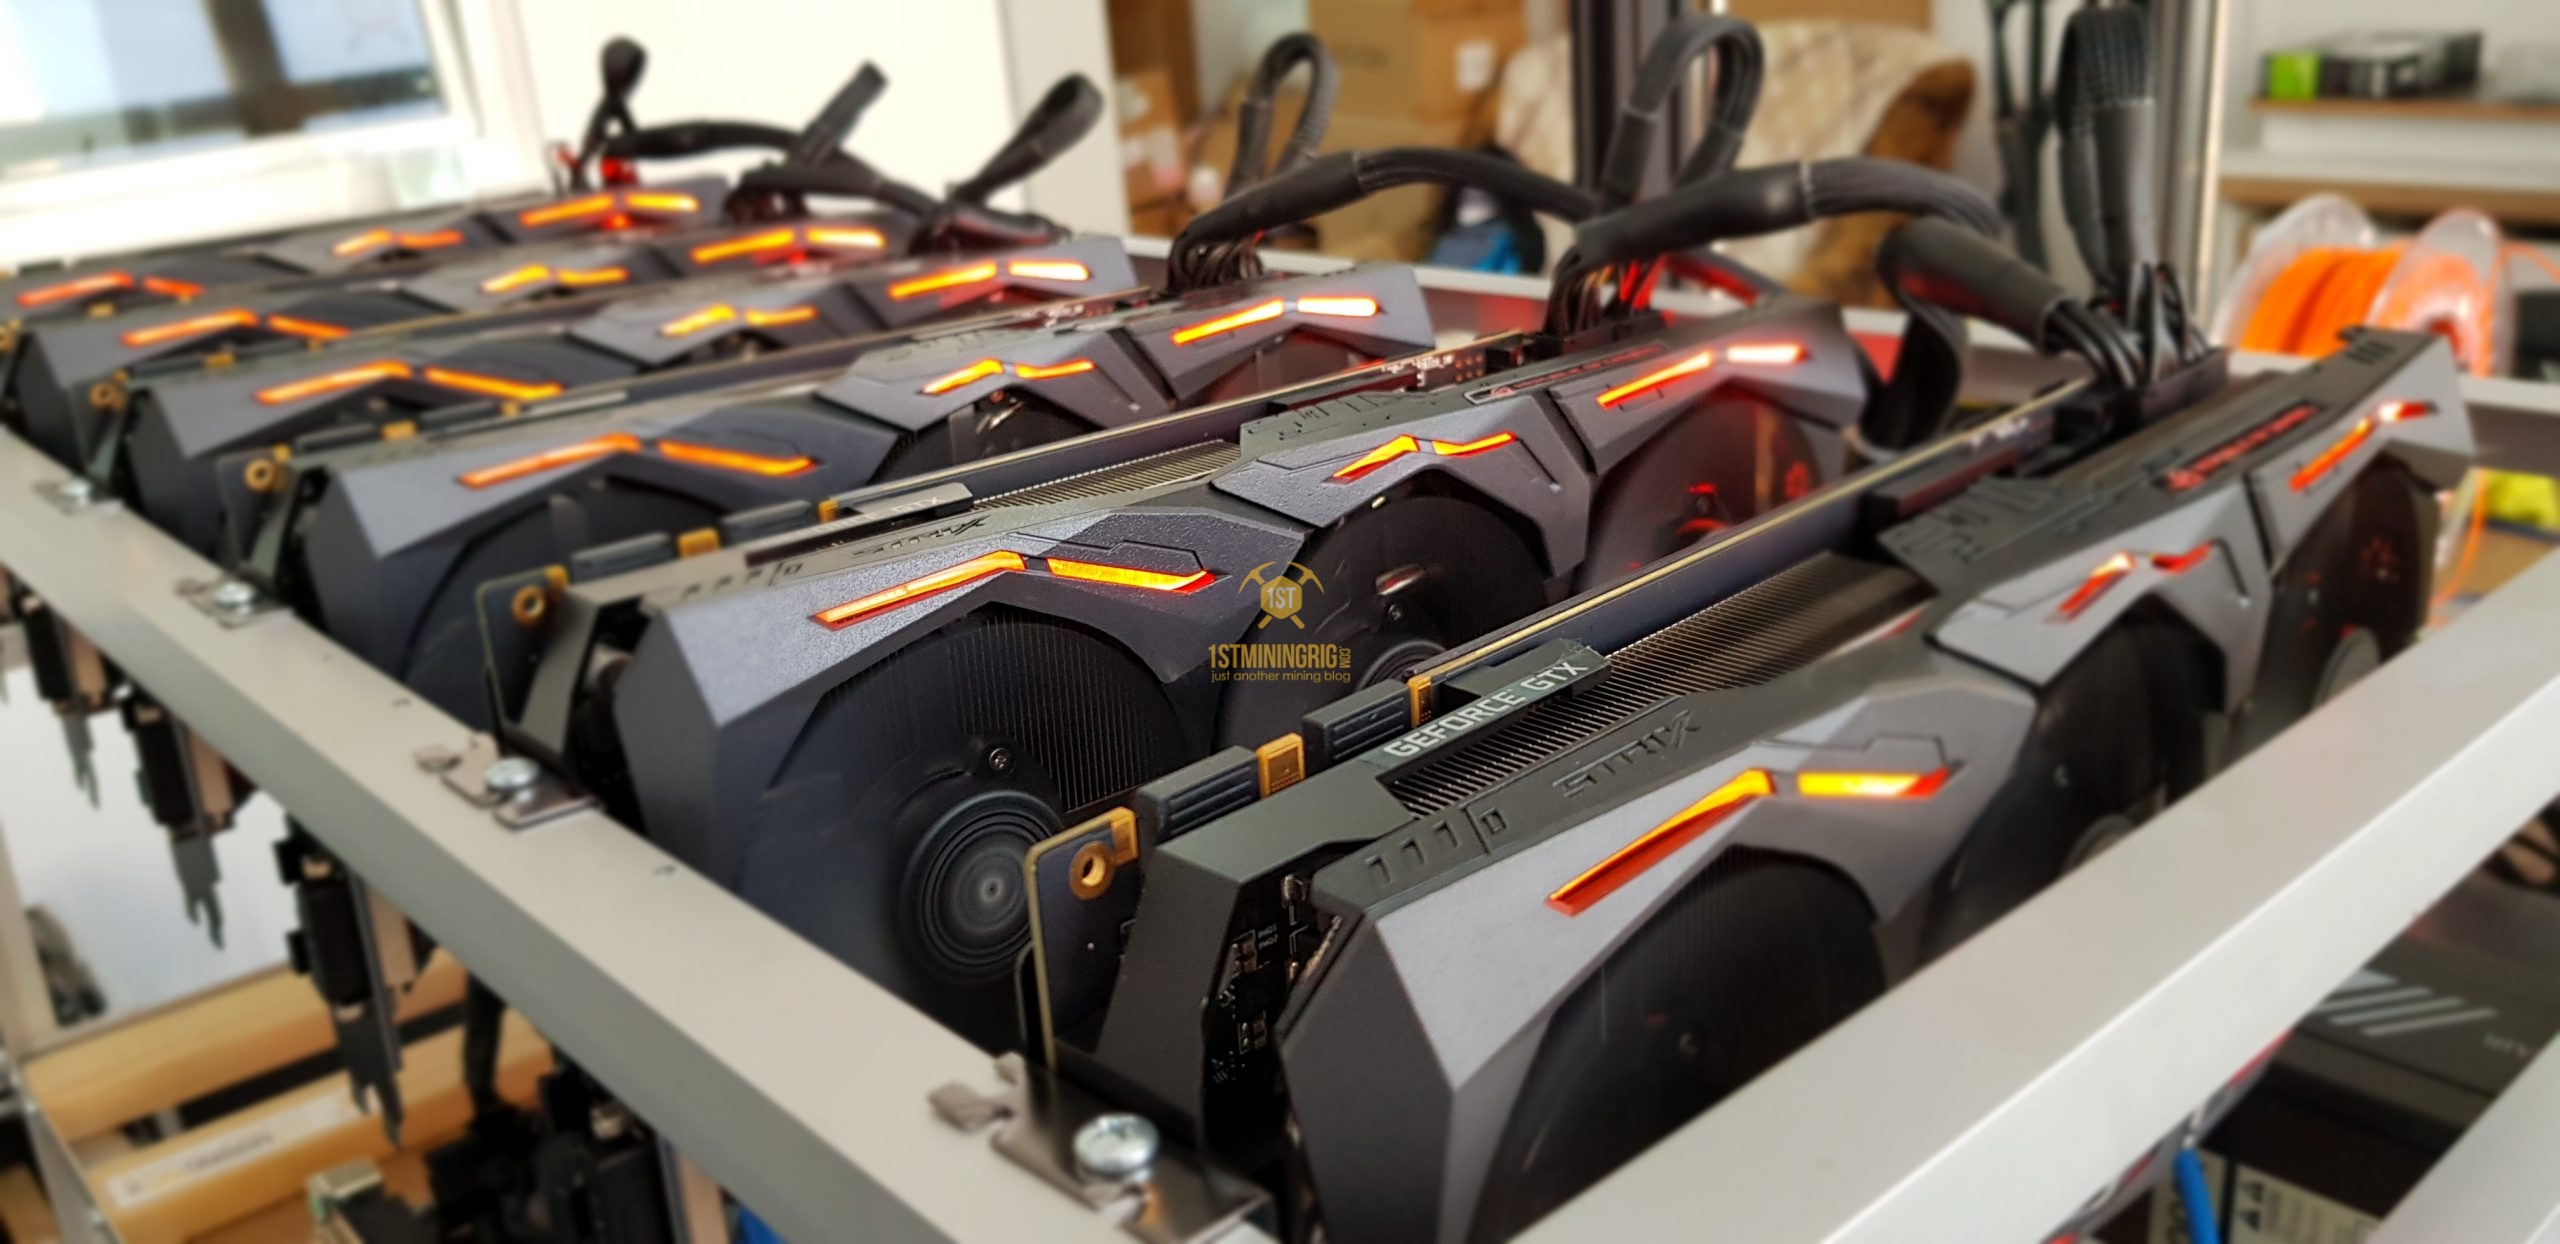 NVidia is ‘Nerfing’ the RTX 30xx GPU’s for Ethereum Mining ...